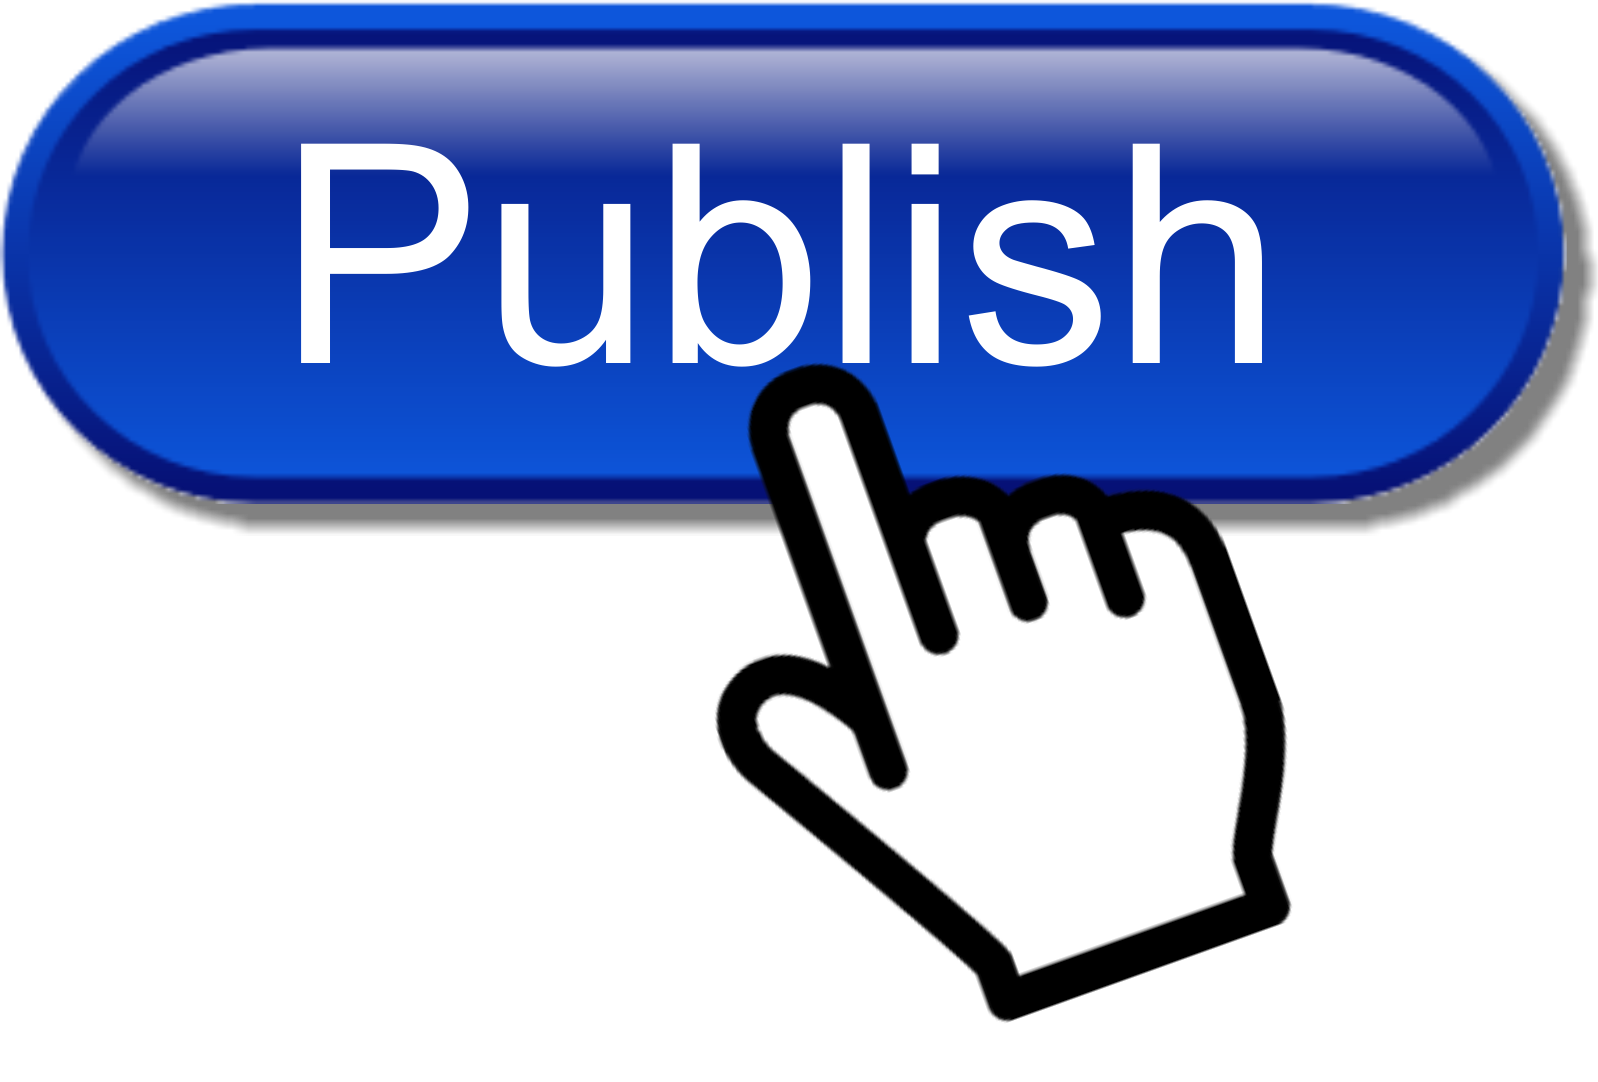 Finding the right publisher